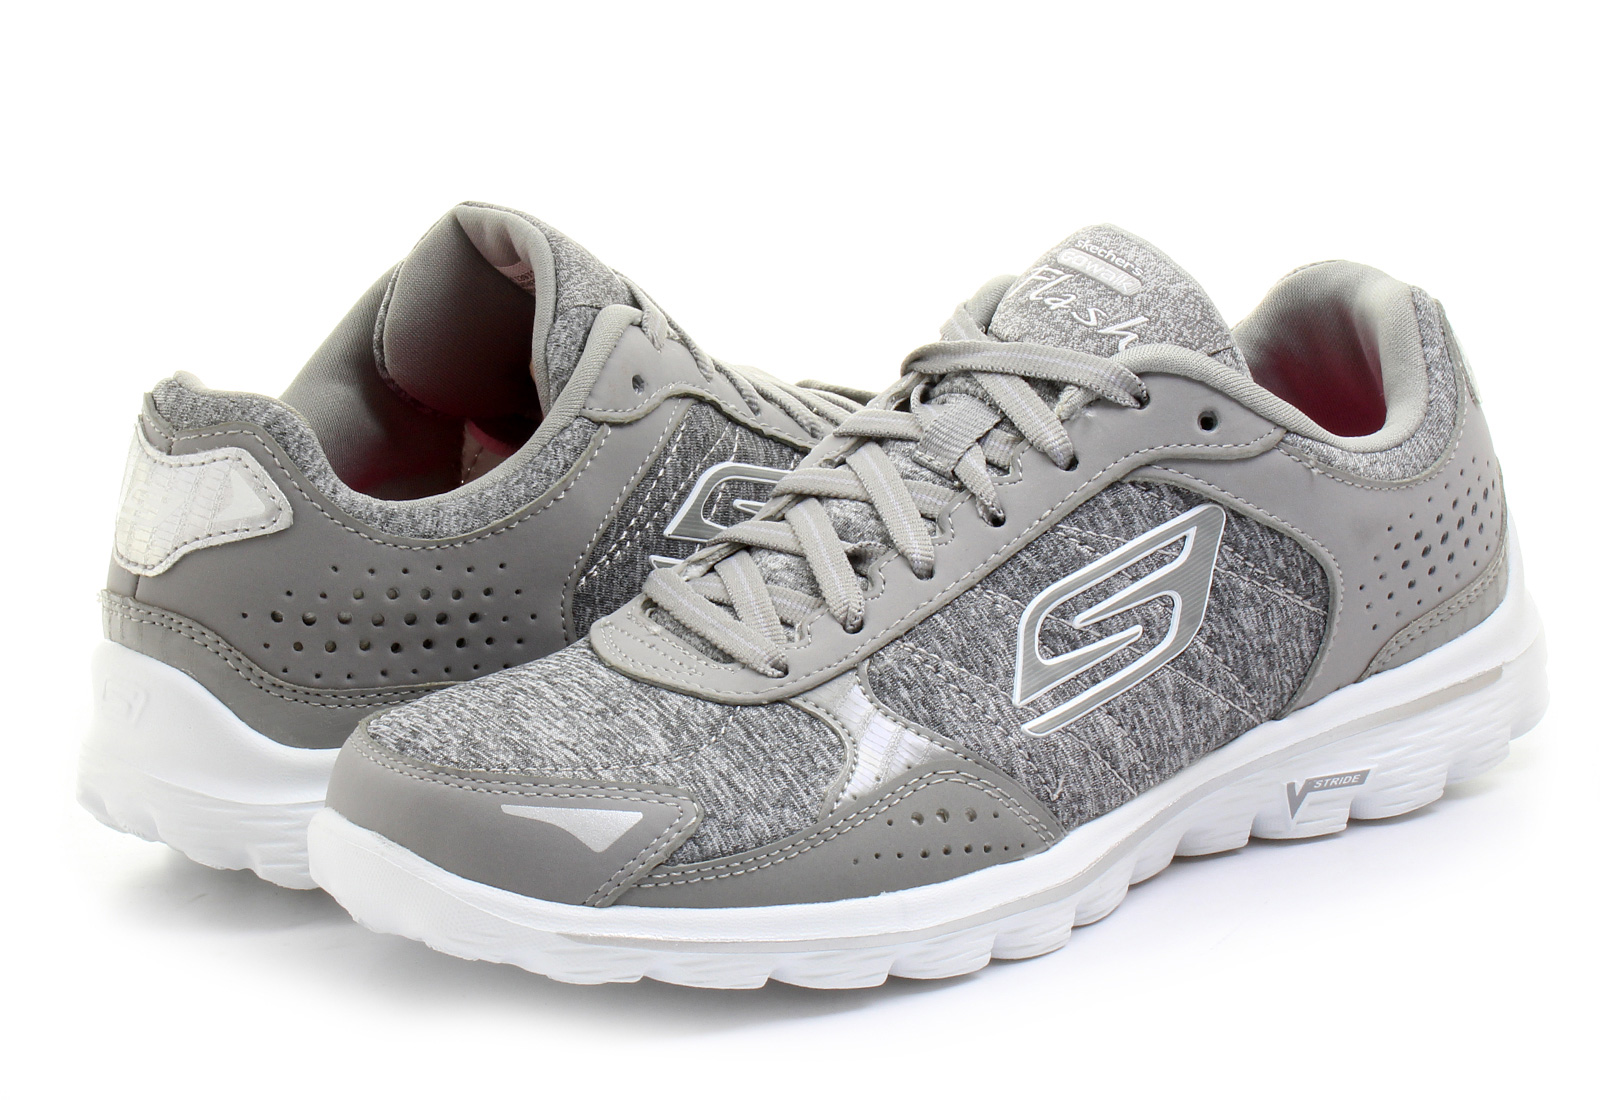 Skechers Shoes - Go Walk 2 - Flash Gym - 13971-GRY - Online shop for